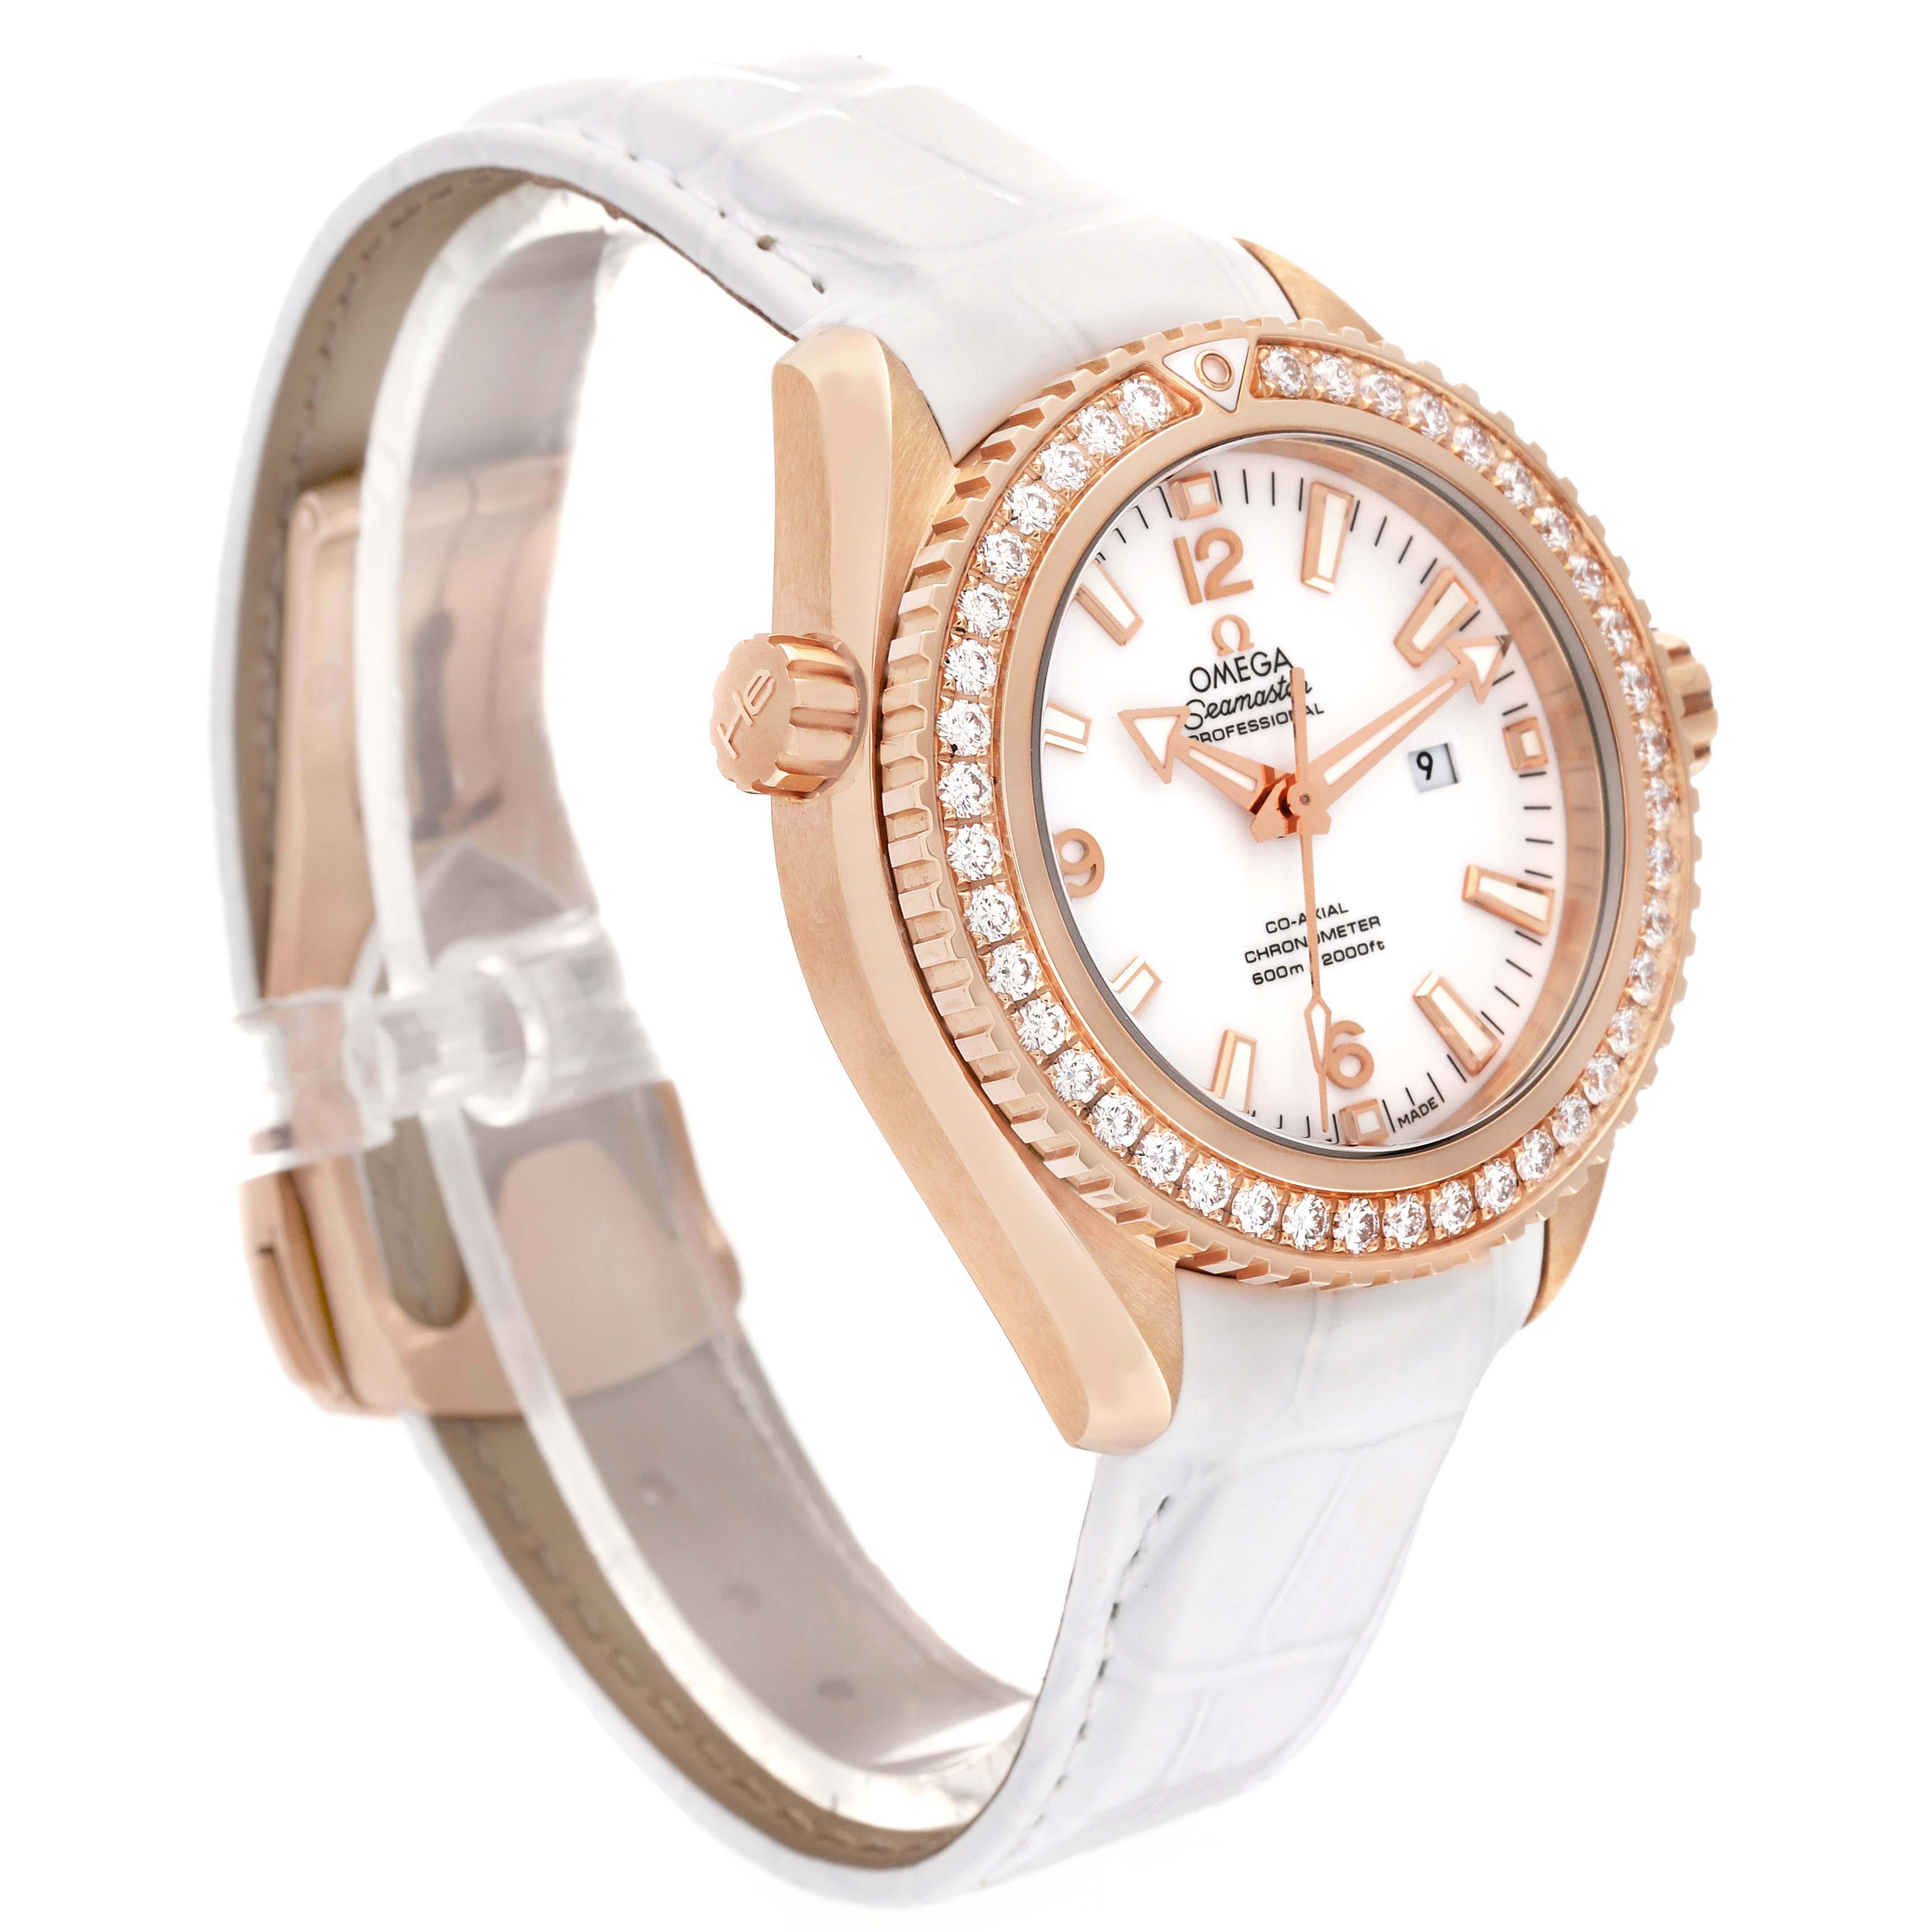 Omega Seamaster Planet Ocean Rose Gold Diamond Ladies Watch 232.58.38.20.04.001 For Sale 4